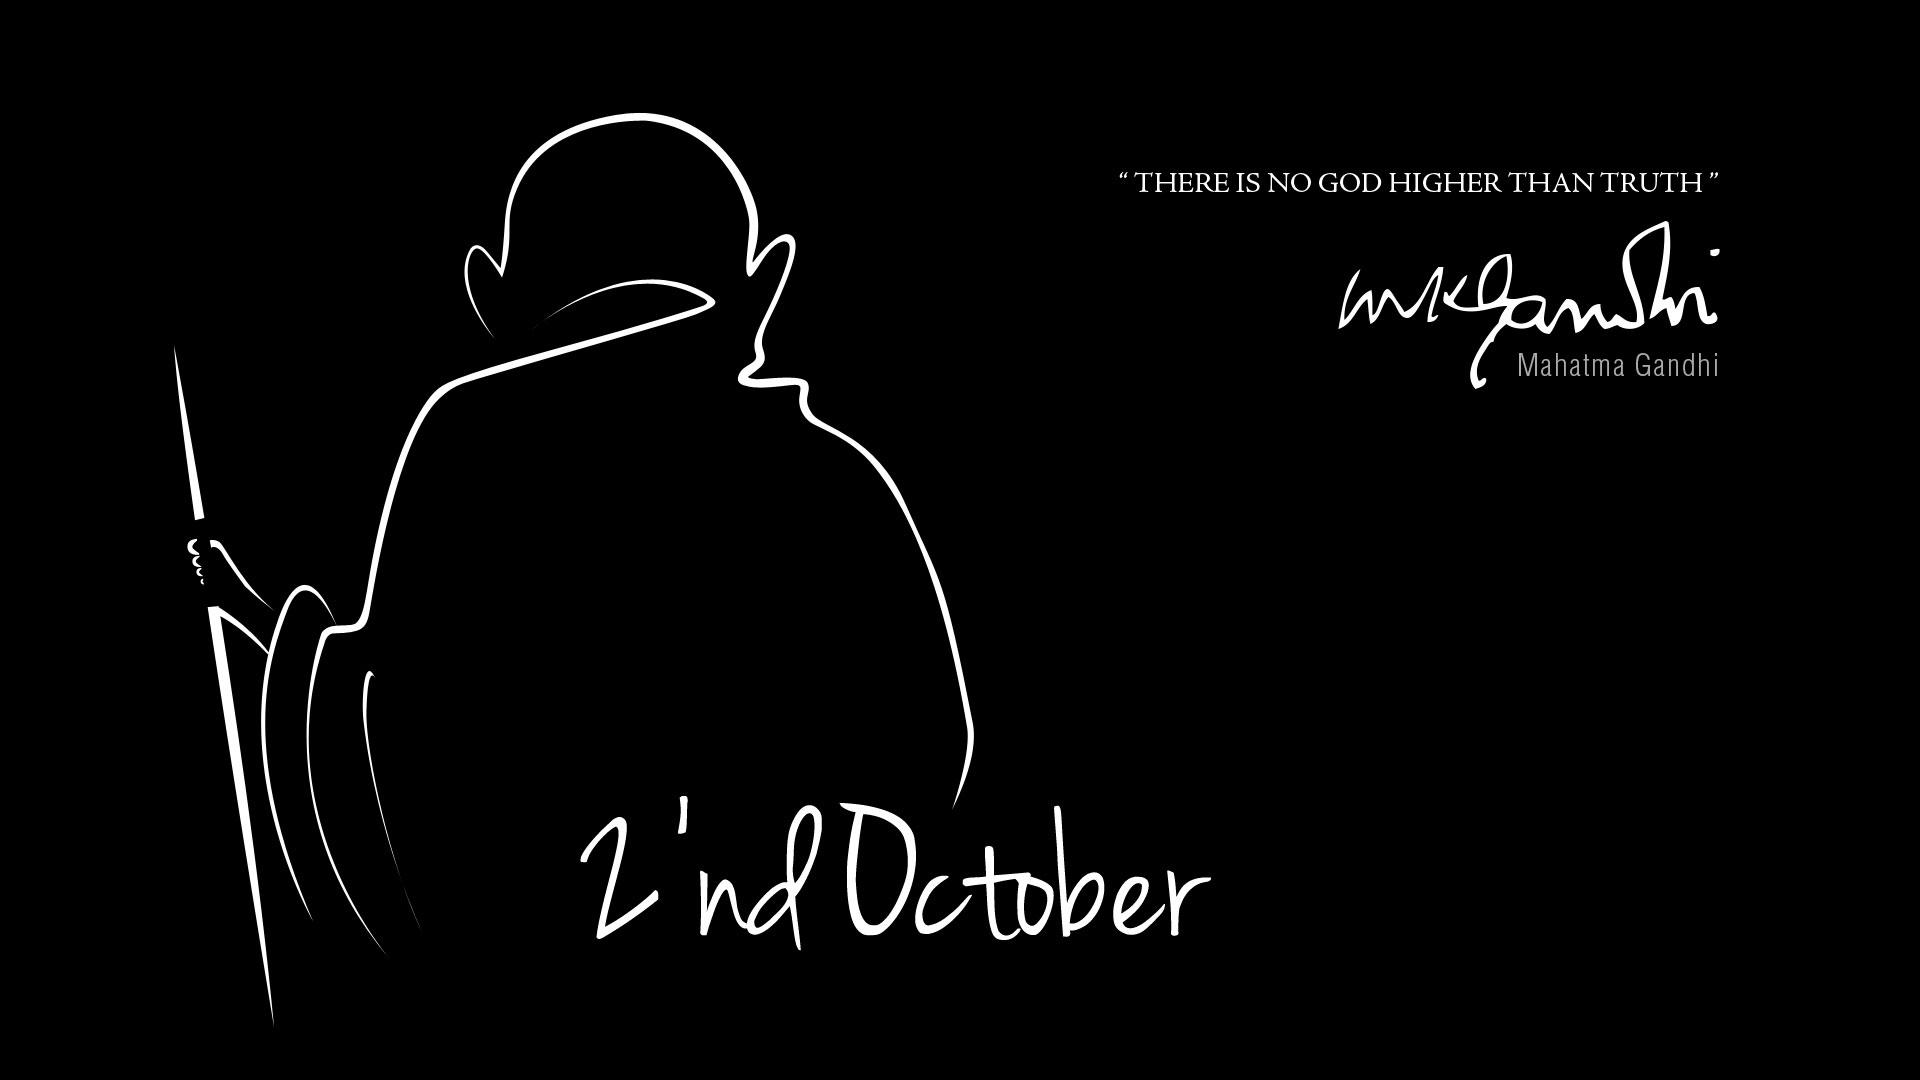 There is no god higher than truth Gandhiji | Get Latest Wallpapers